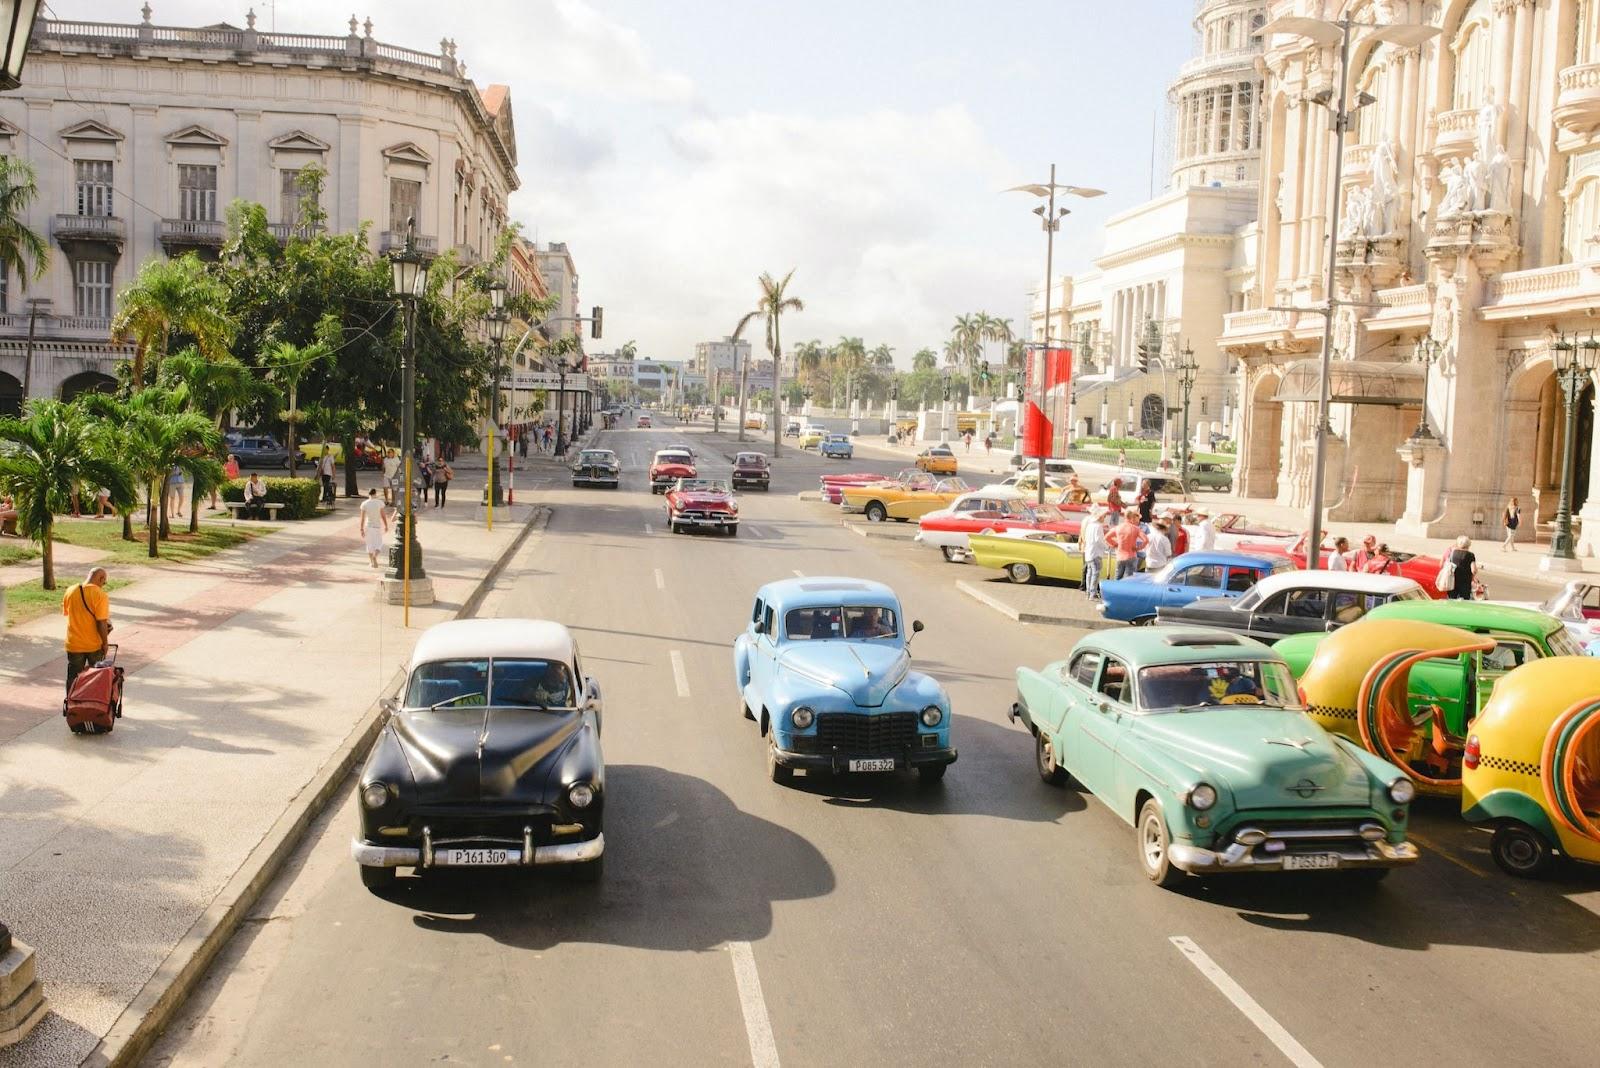 Streets and roads of Cuba with vintage cars.